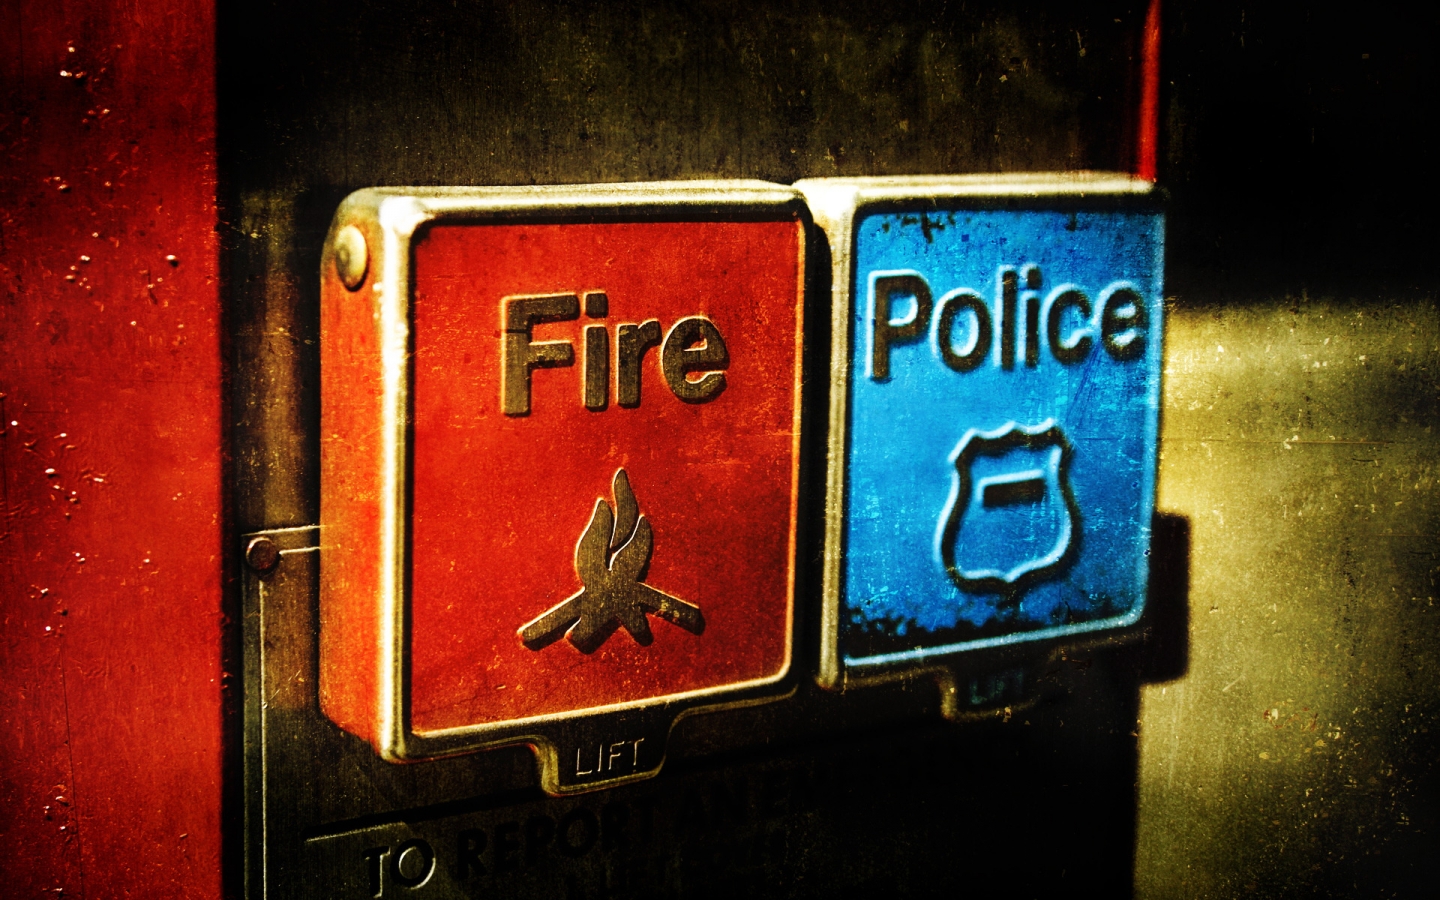 Emergency Fire and Police for 1440 x 900 widescreen resolution